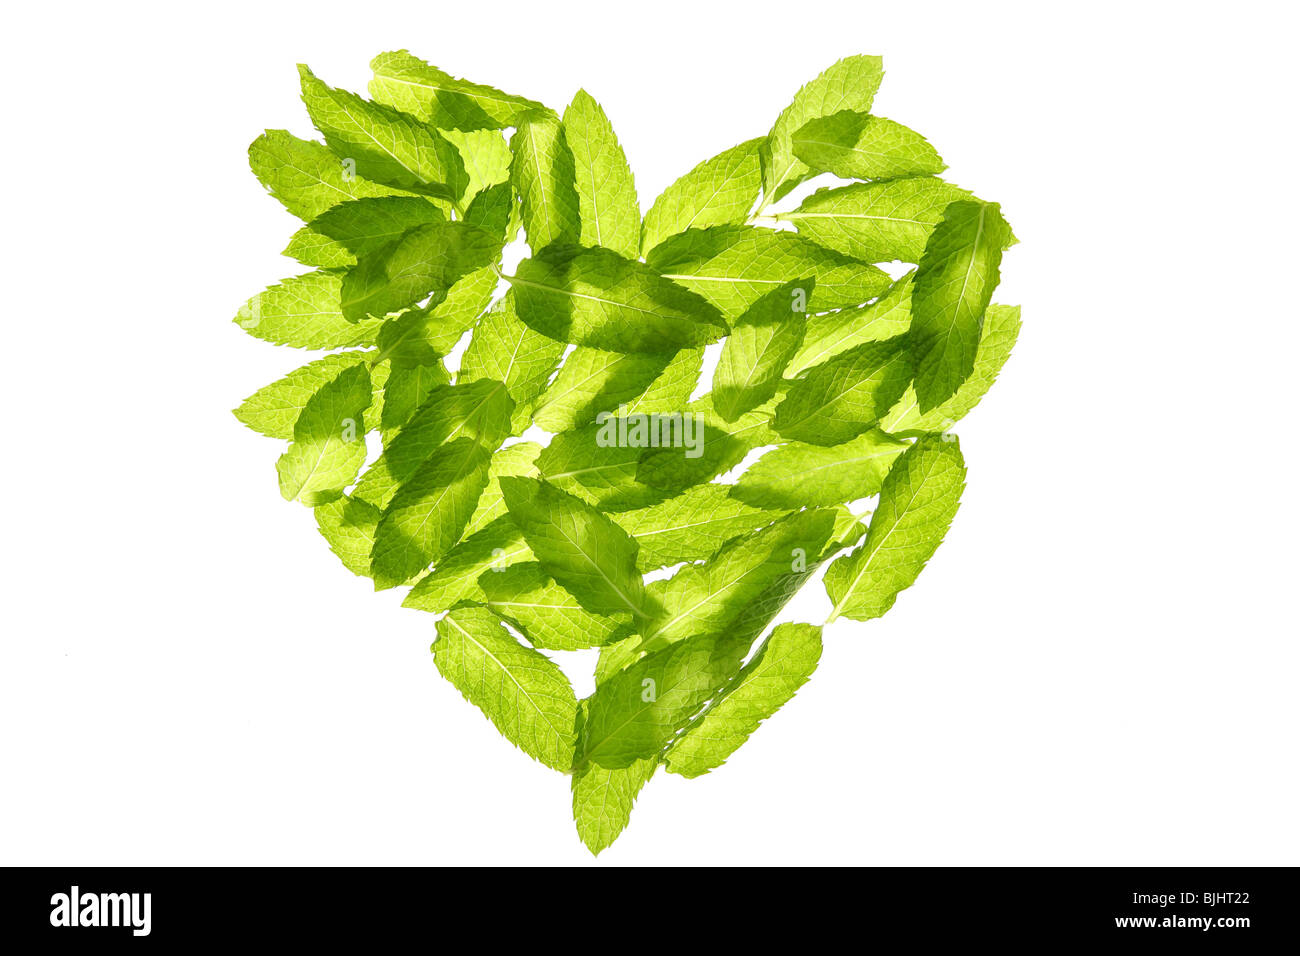 Young mint plant Cut Out Stock Images & Pictures - Page 2 - Alamy